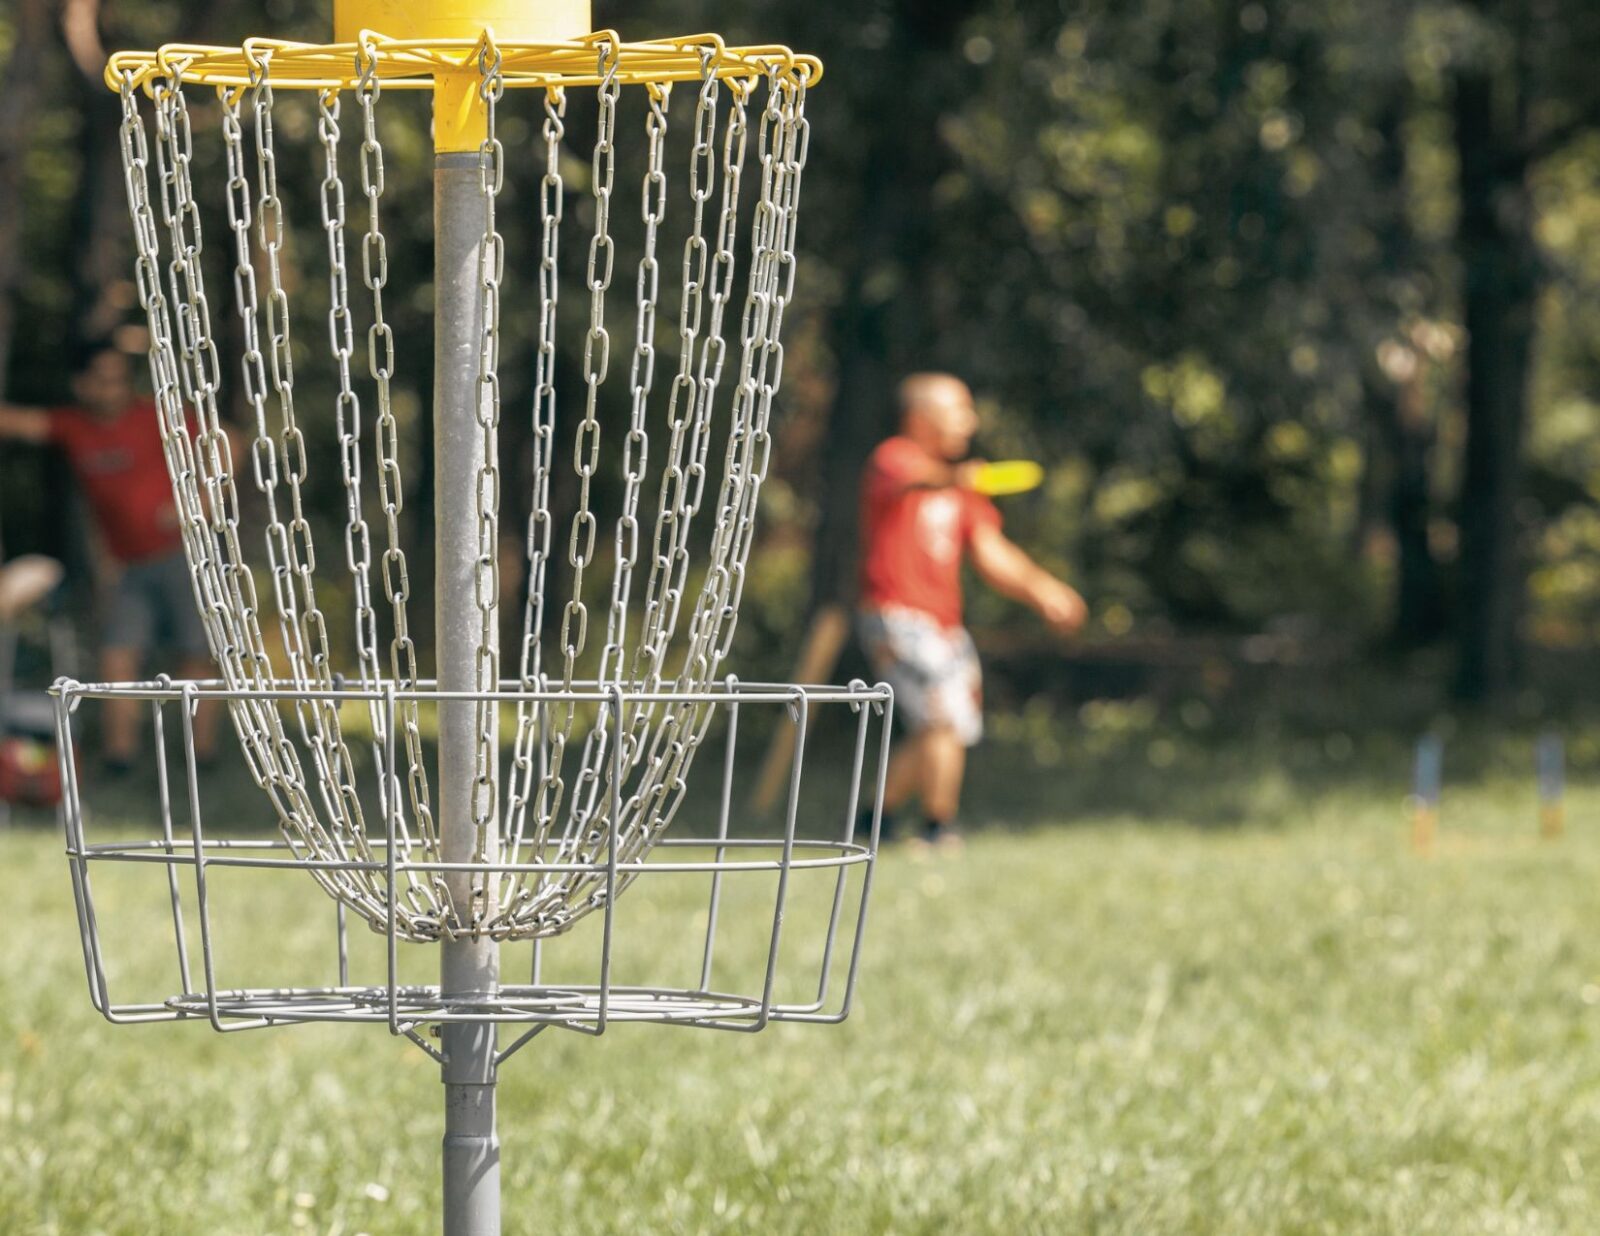 Proposed Disc Golf Course in Howell Road Park East - Town of Perinton